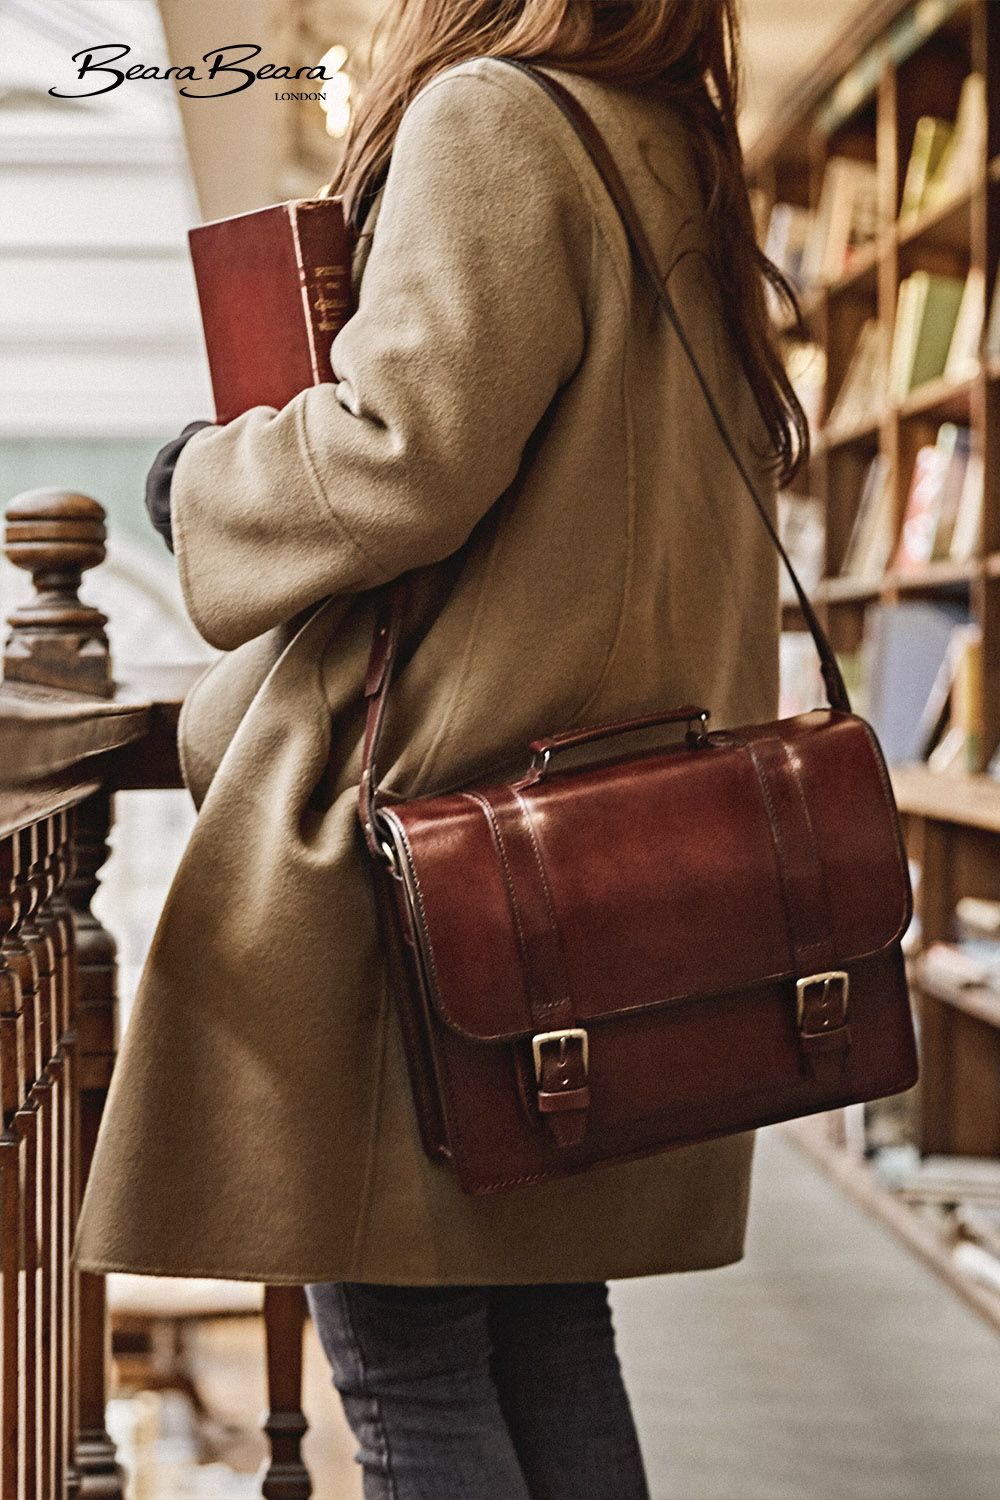 Satchel Bags: Classic and Timeless Accessories for Every Occasion